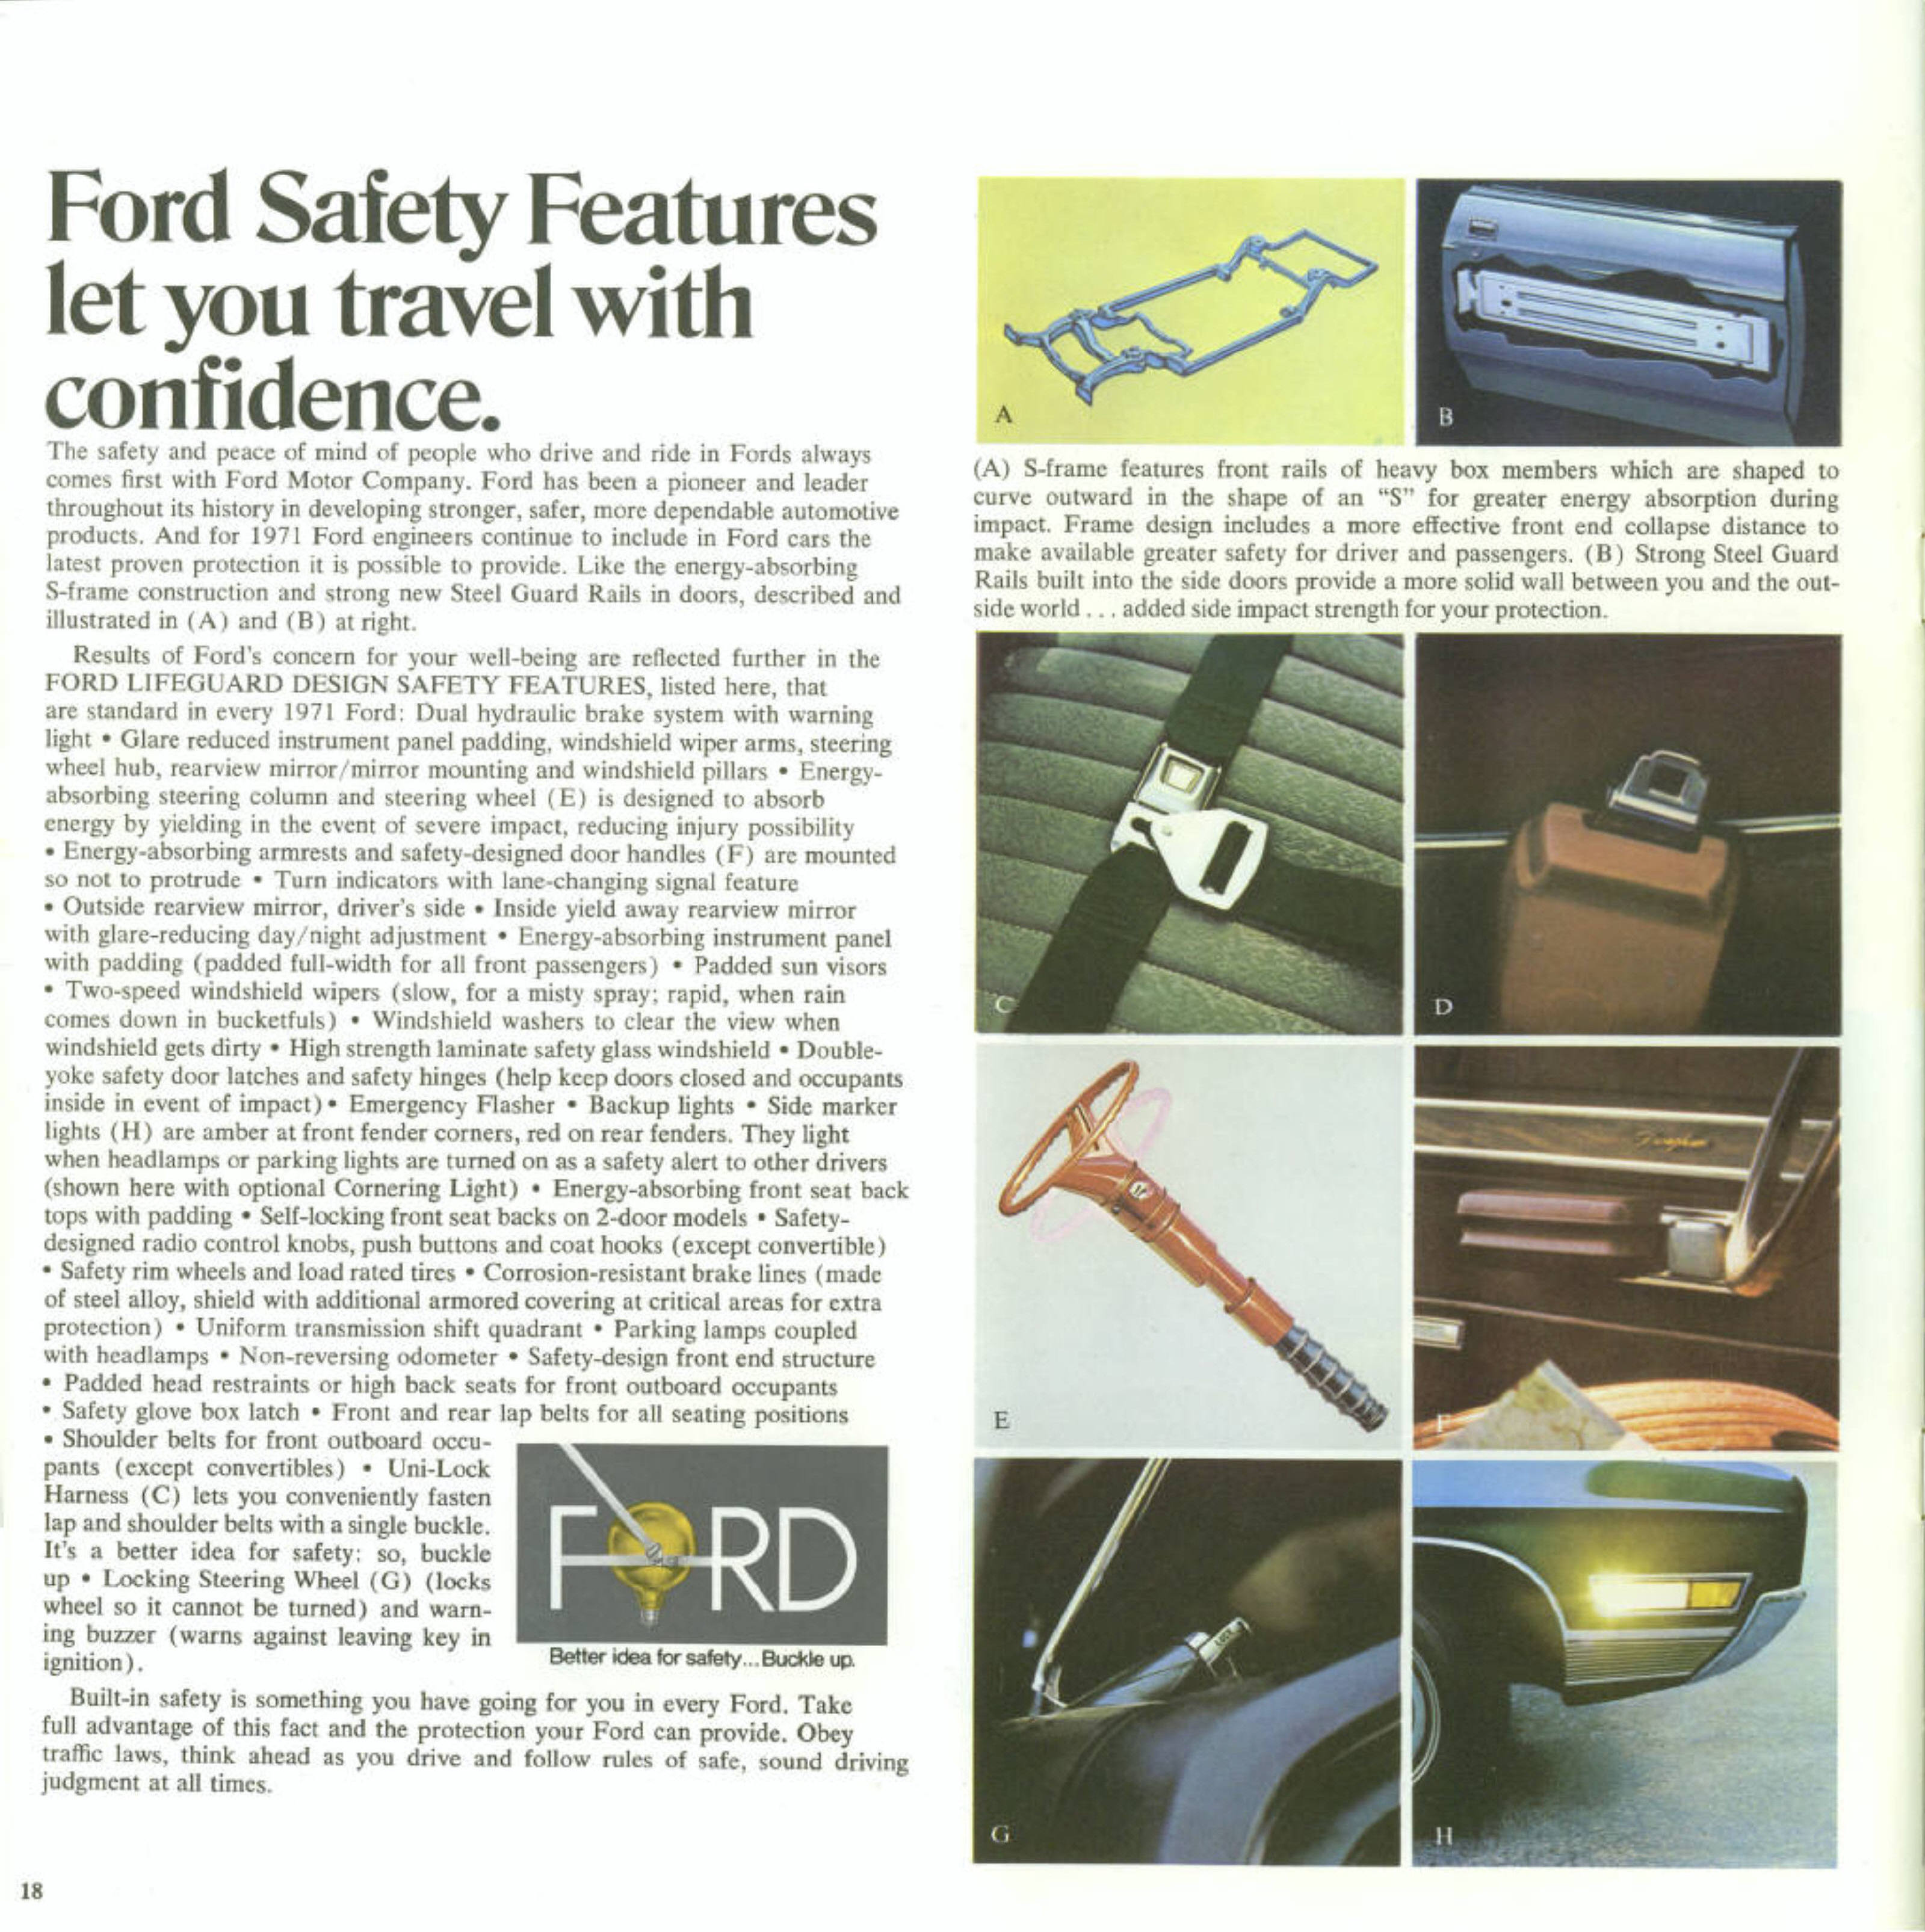 1971 Ford Full-Size Brochure Page 9